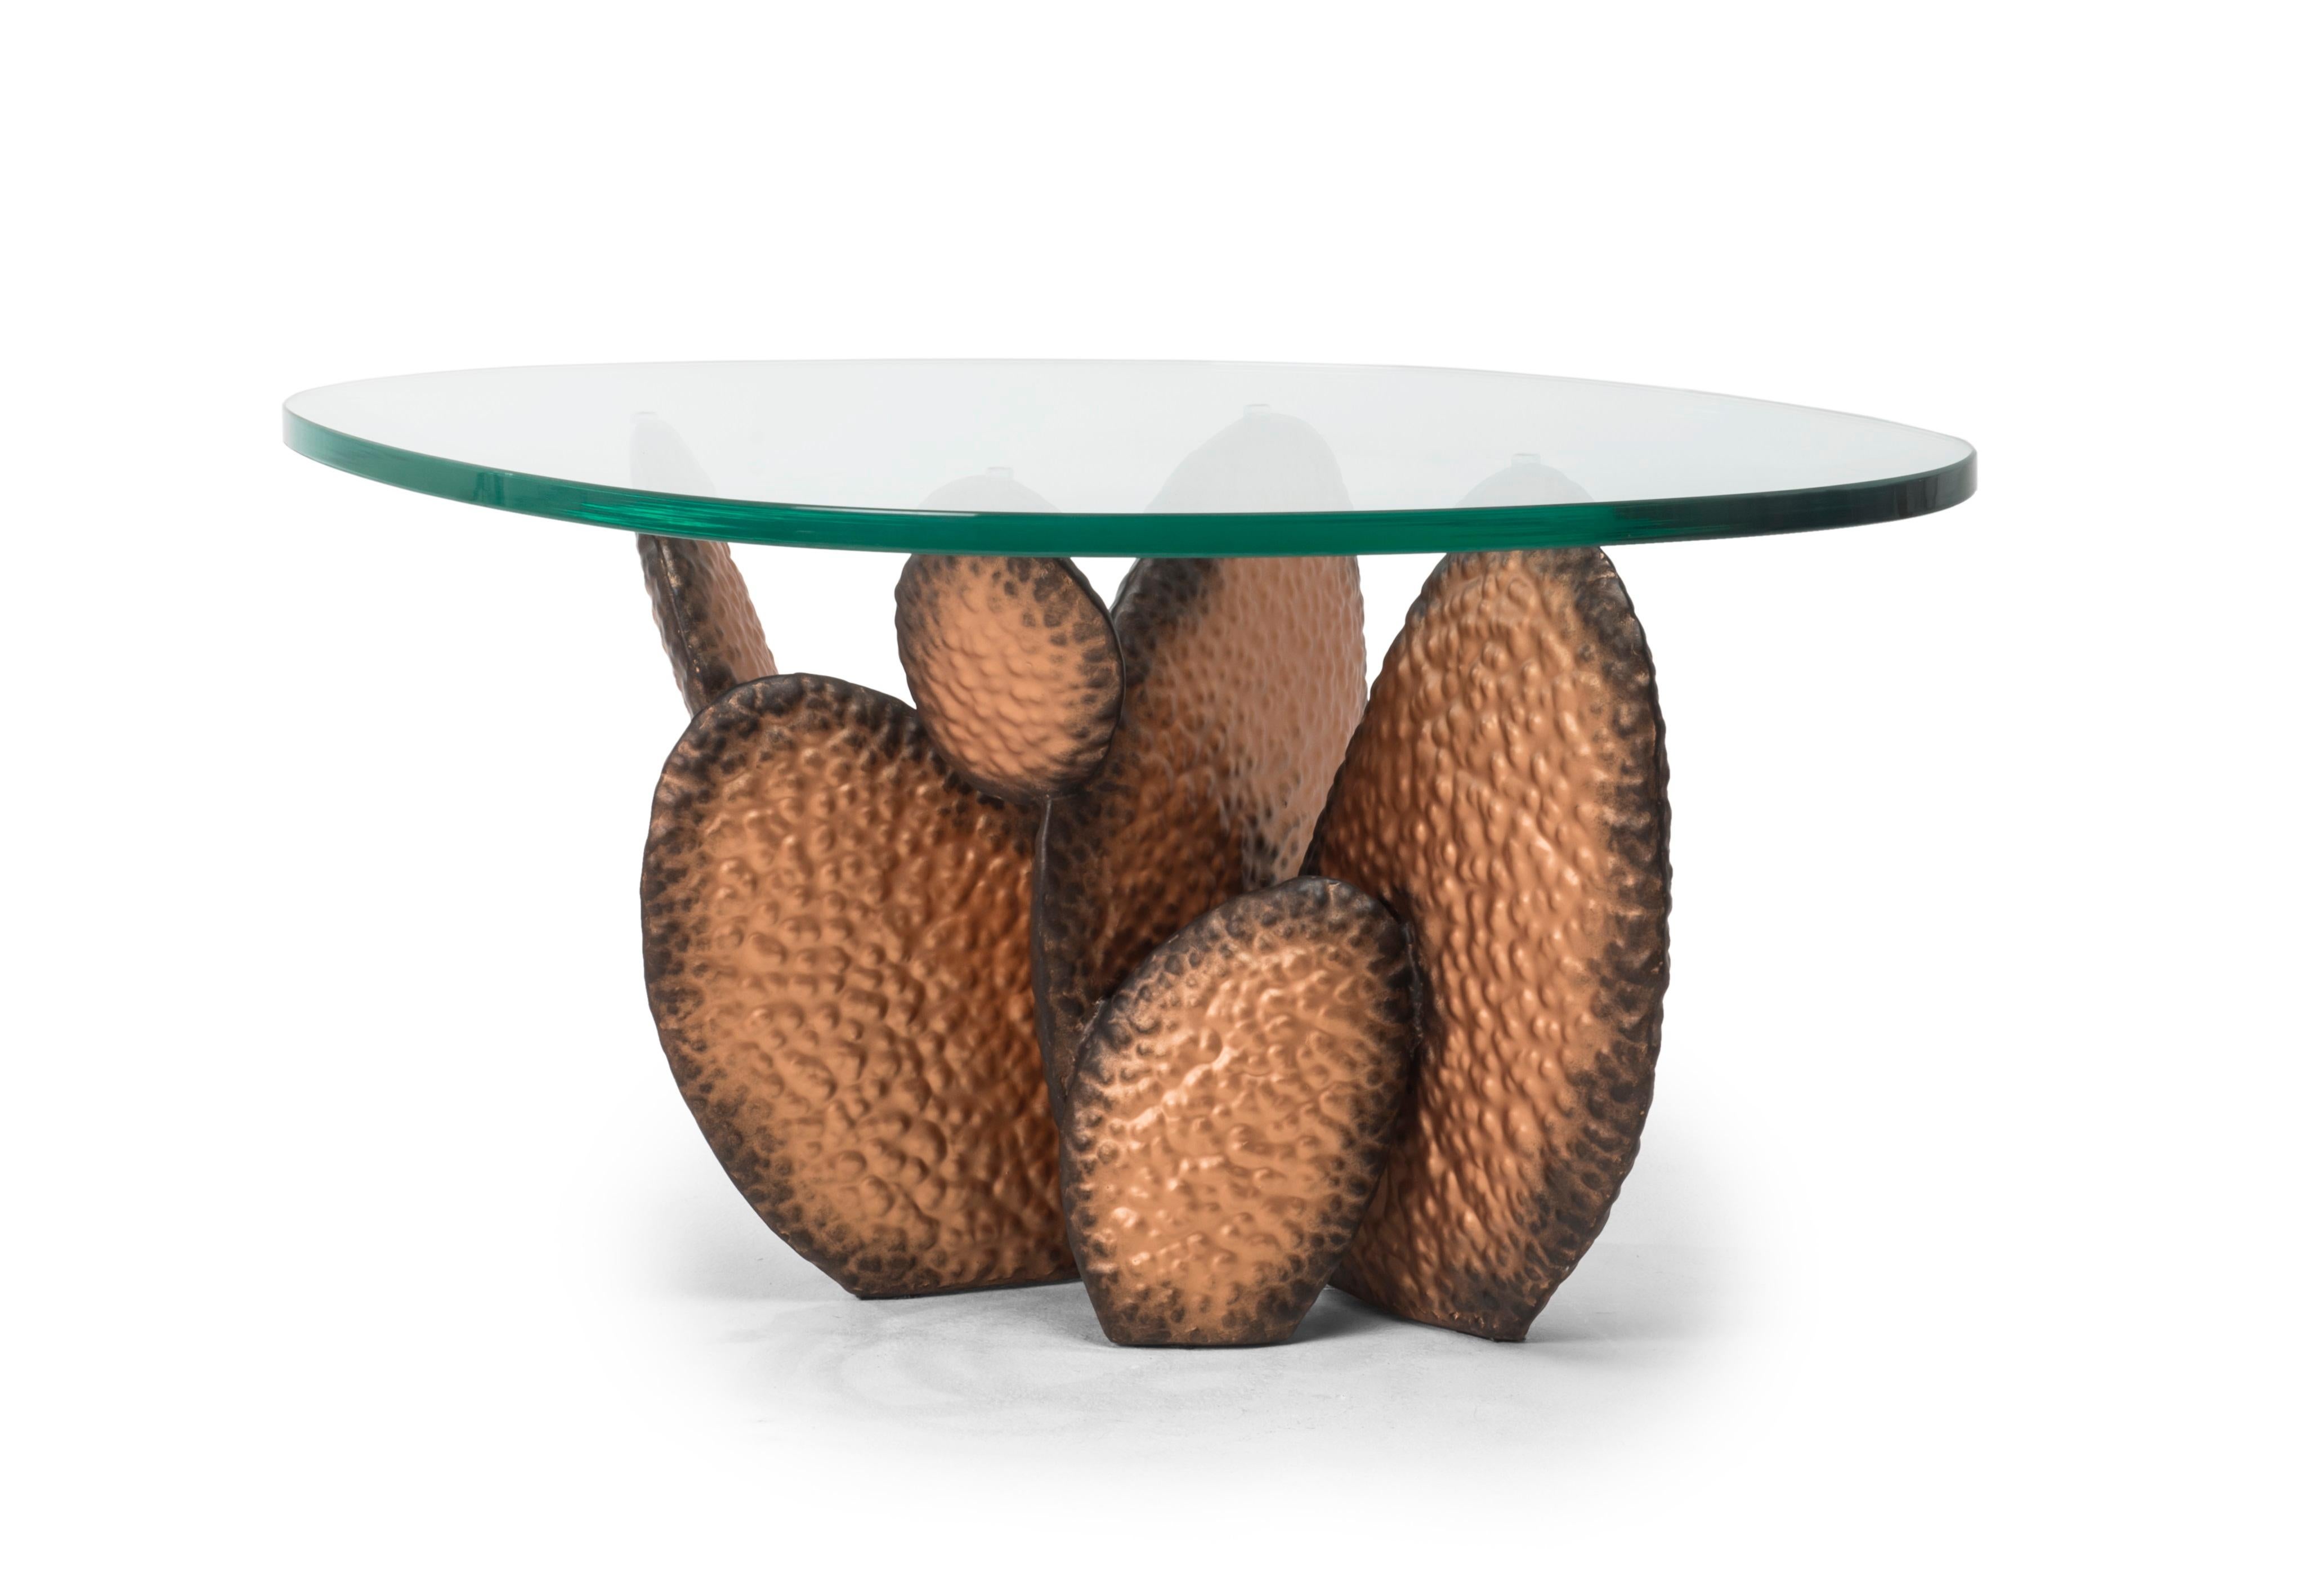 Low Gobi coffee table by Kenneth Cobonpue.
Materials: Steel. Glass. 
Also available in other sizes.
Dimensions: 
Glass 85 cm x 59 cm x H 19mm.
Base 41.5 cm x 60 cm x H 39.5 cm.

Inspired by the characteristic form of the cactus, Gobi is a